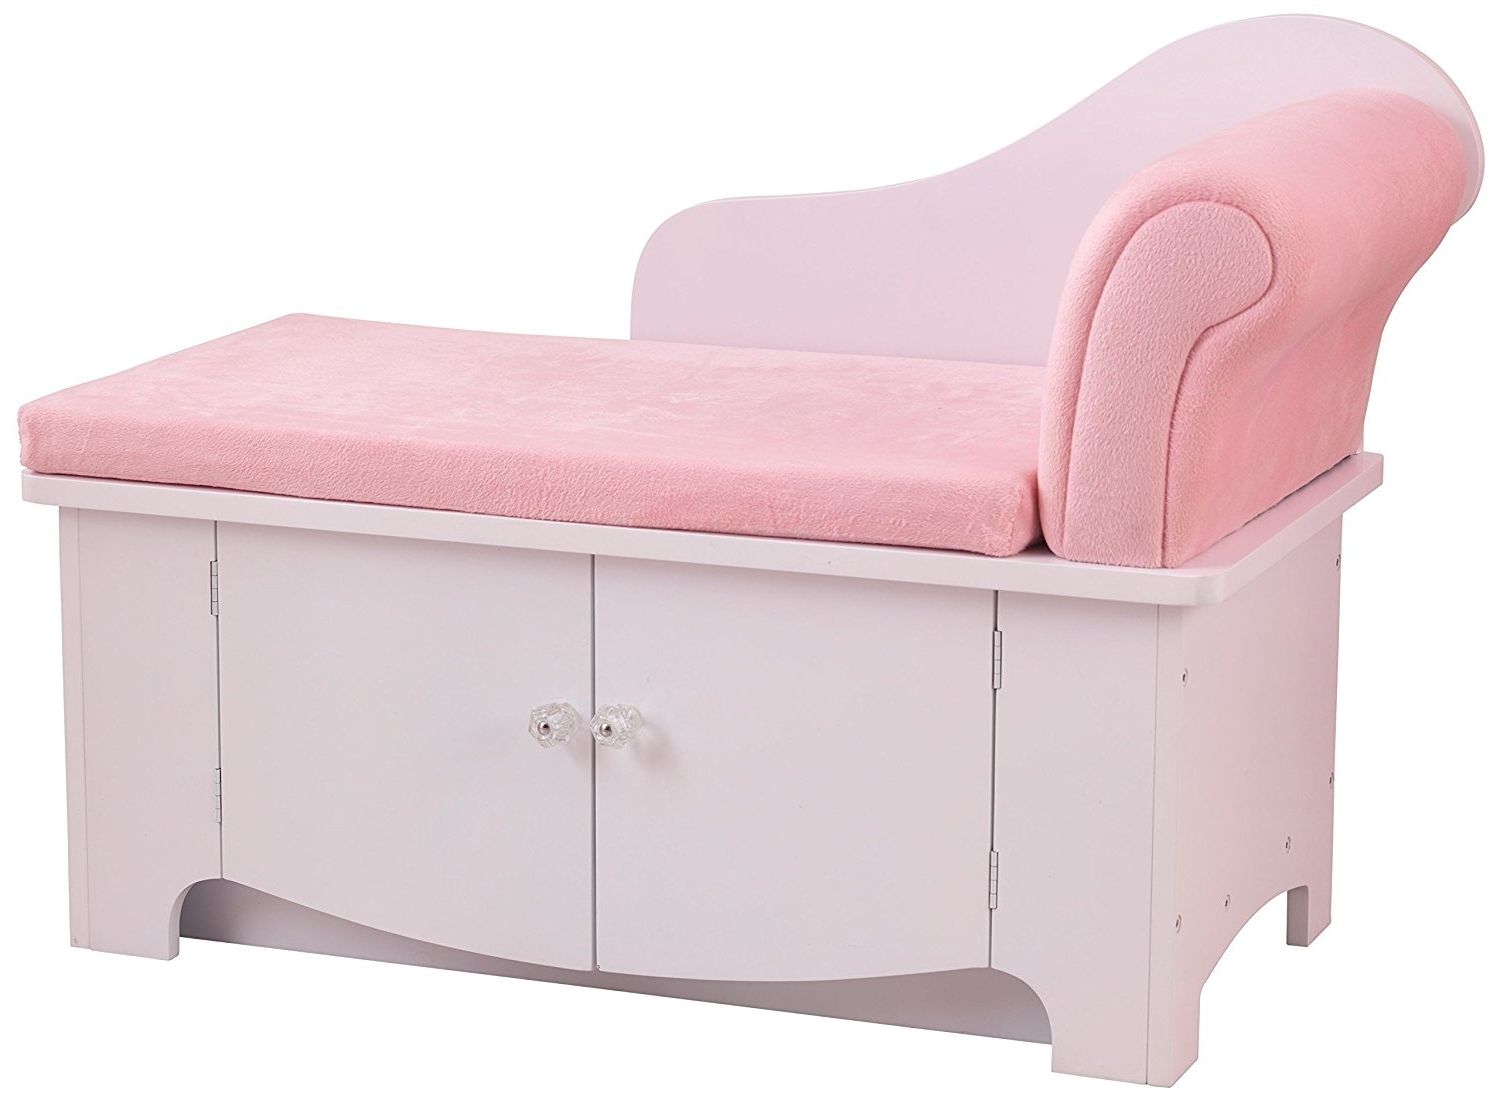 2018 Pink Chaises Regarding Amazon: Kidkraft Girl's Princess Chaise Lounge: Toys & Games (View 11 of 15)